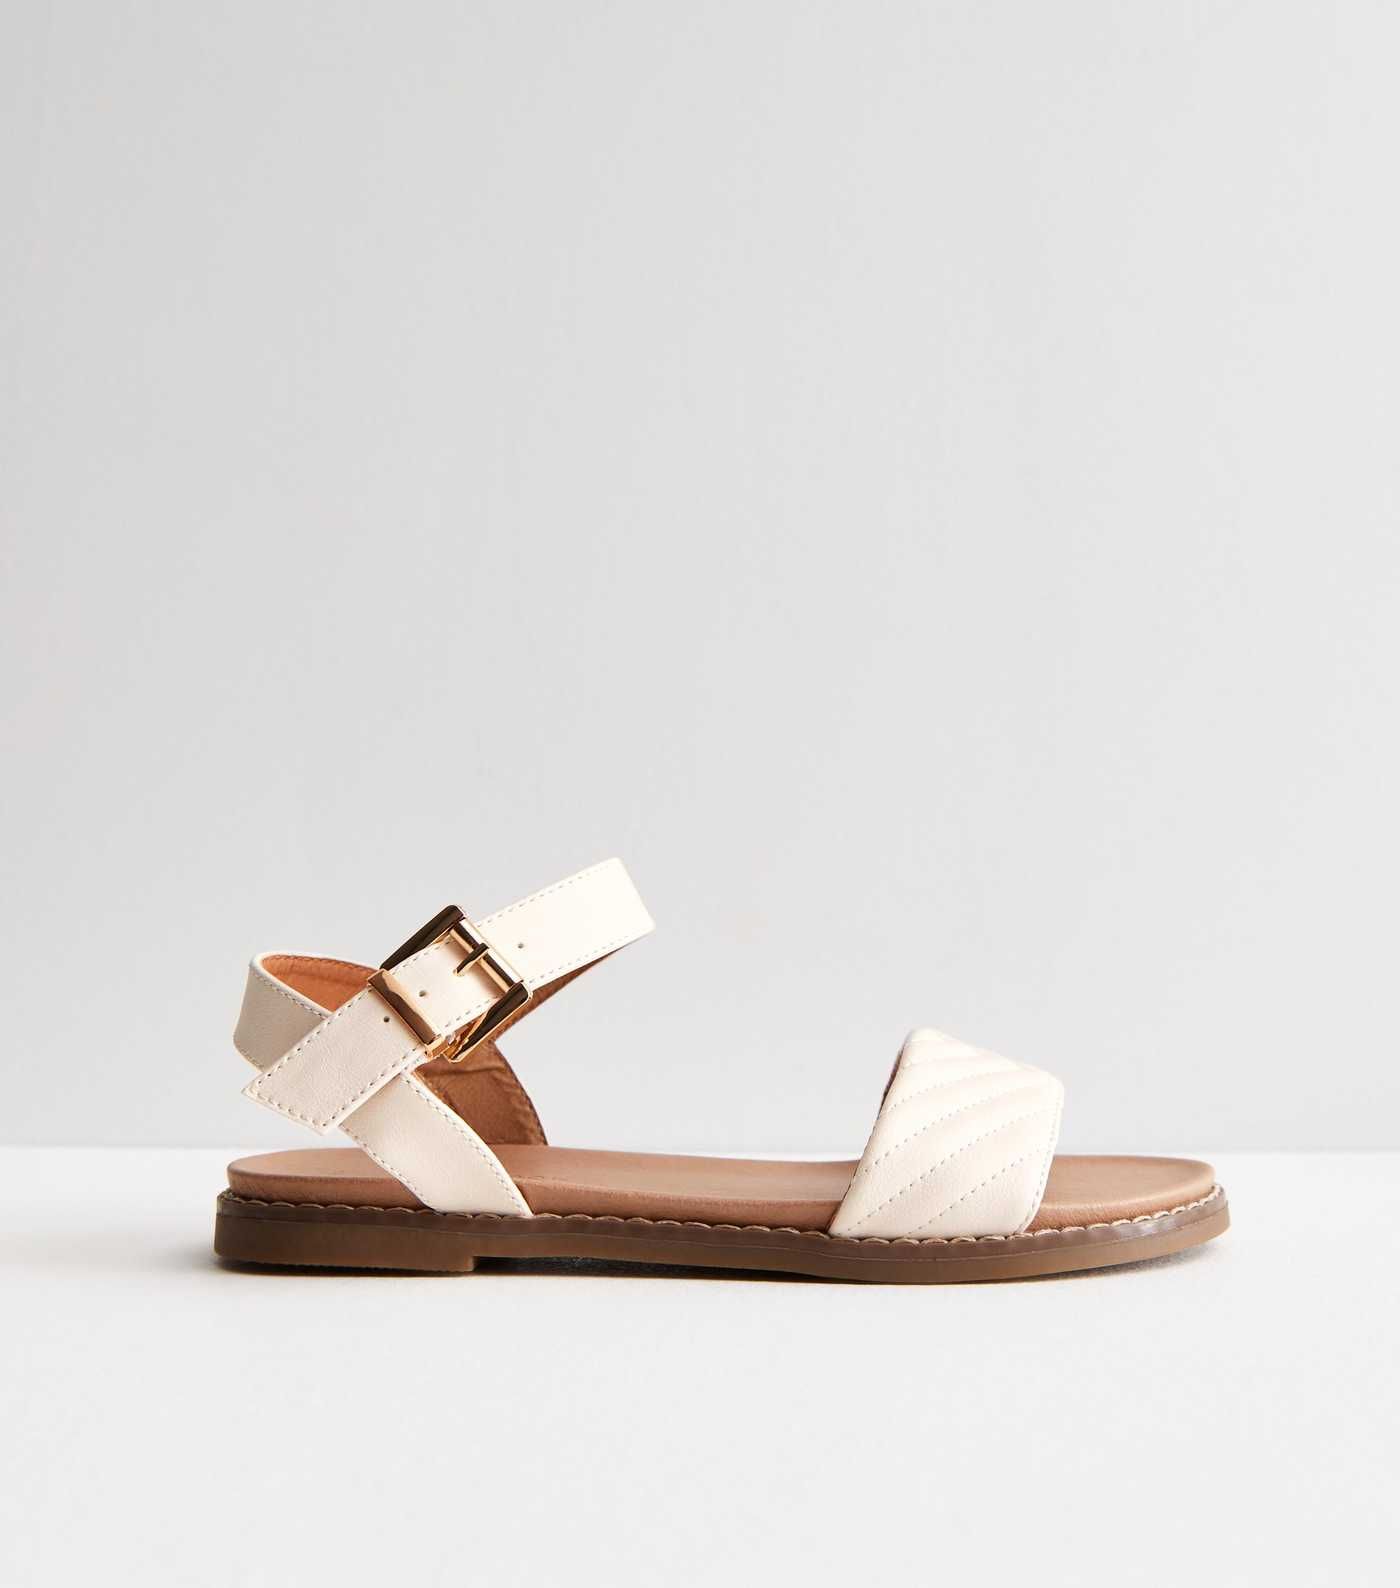 Off White Quilted 2 Part Buckle Sandals
						
						Add to Saved Items
						Remove from Saved I... | New Look (UK)